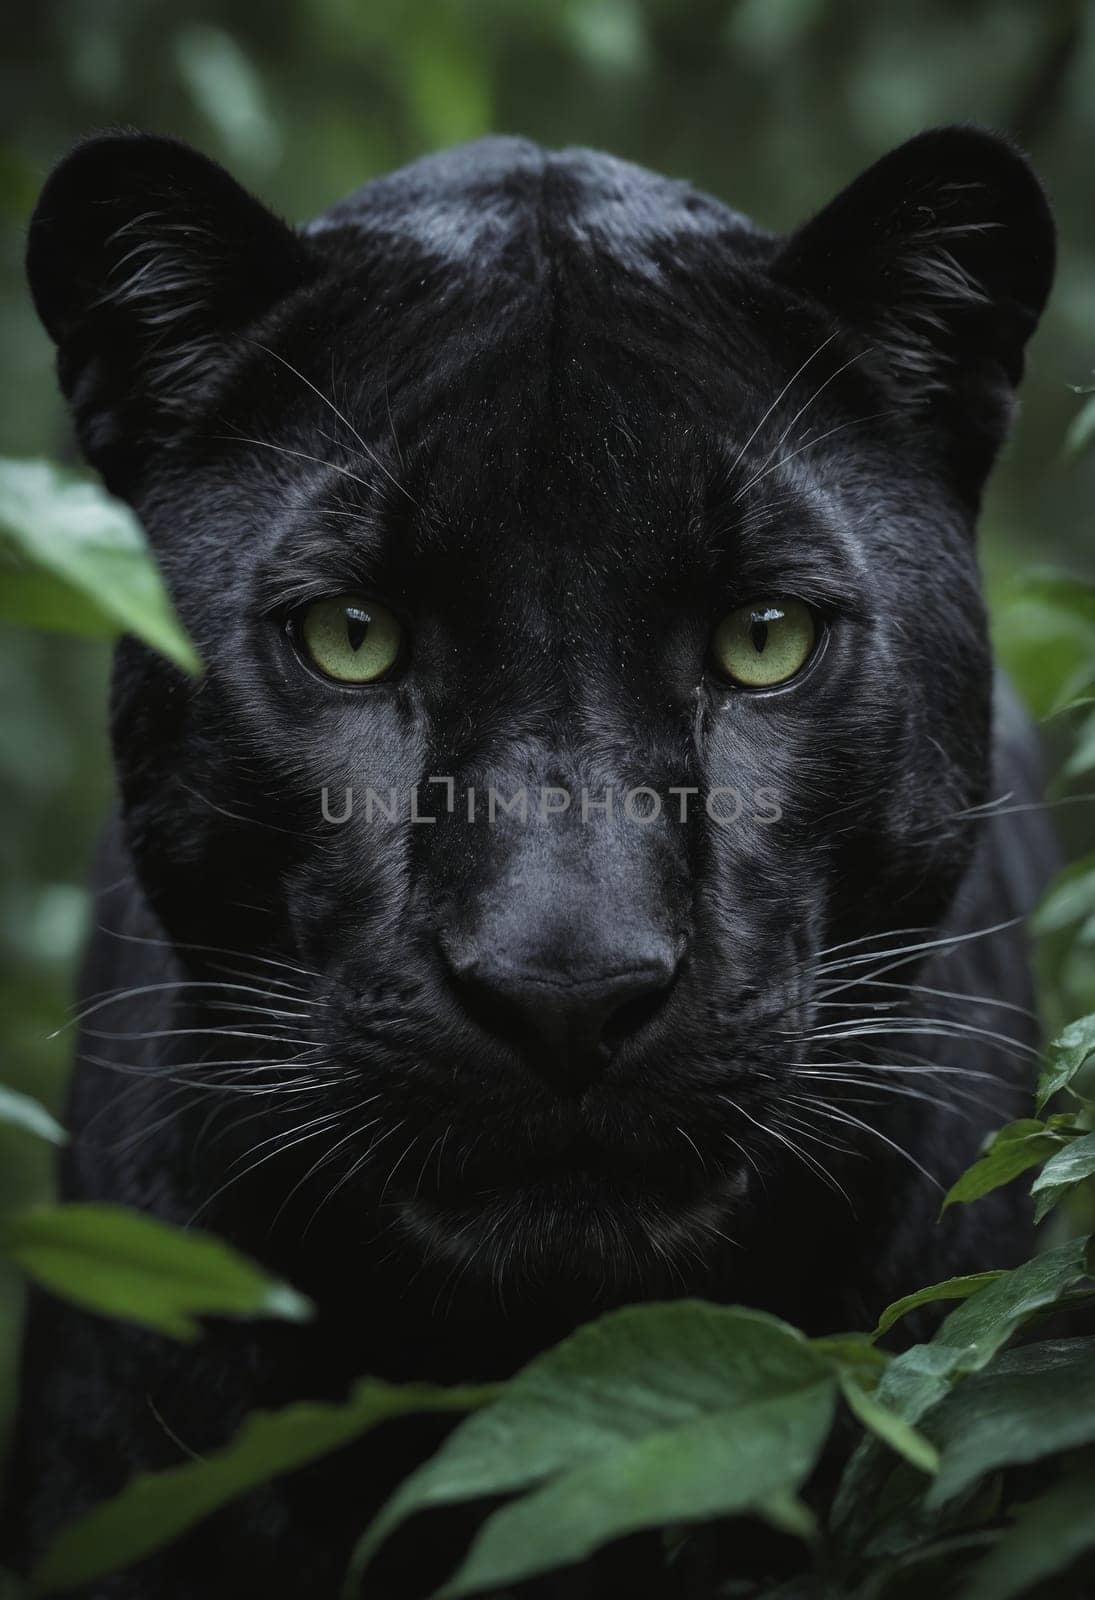 A black jaguar's penetrating gaze is framed by lush leaves, showcasing the raw allure of the wild.